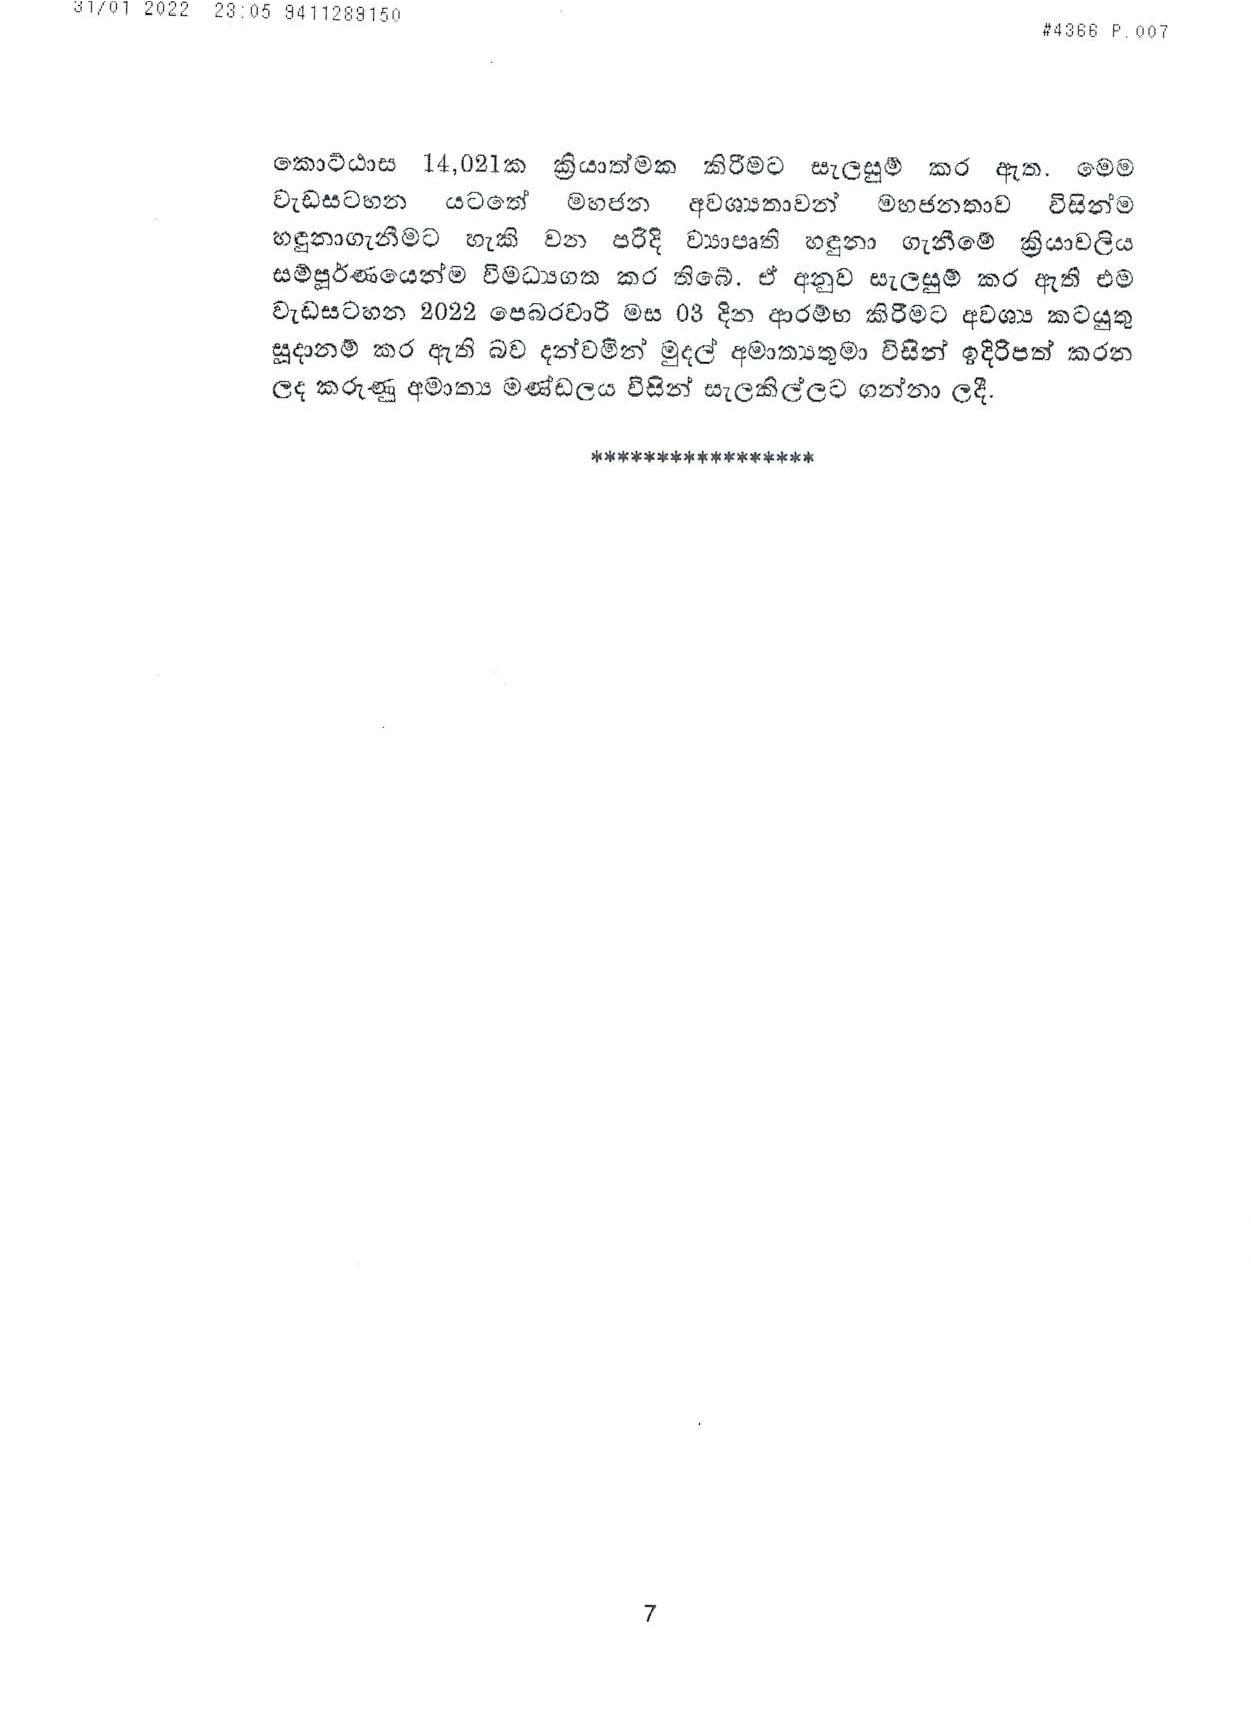 Cabinet Decision on 31.01.2022 page 007